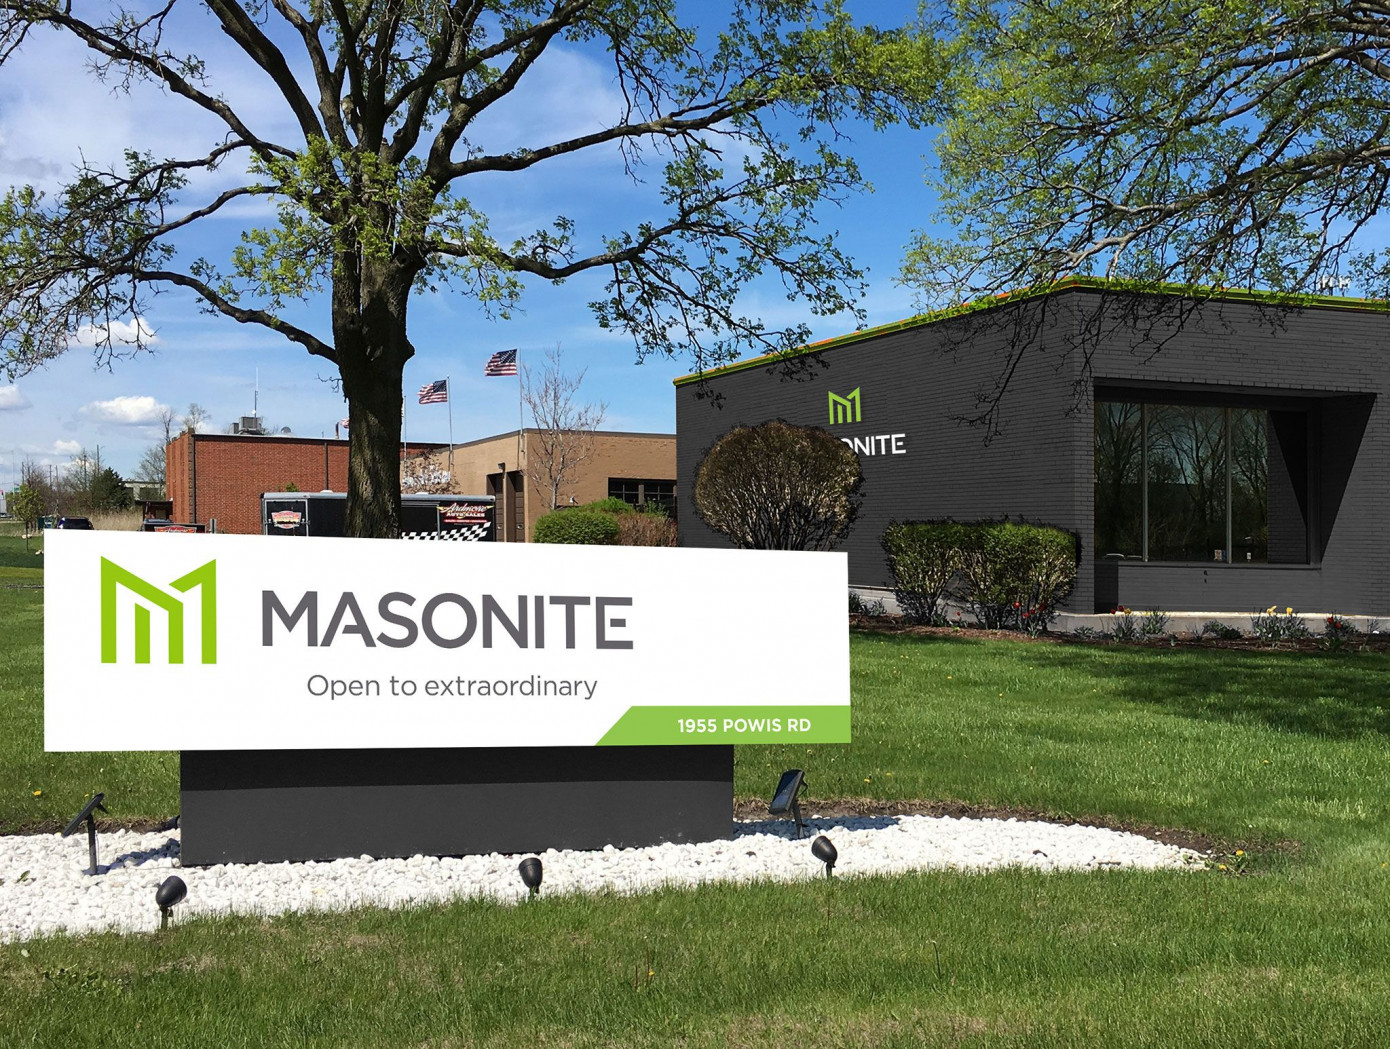 Masonite confirms termination of agreement to acquire PGT Innovations